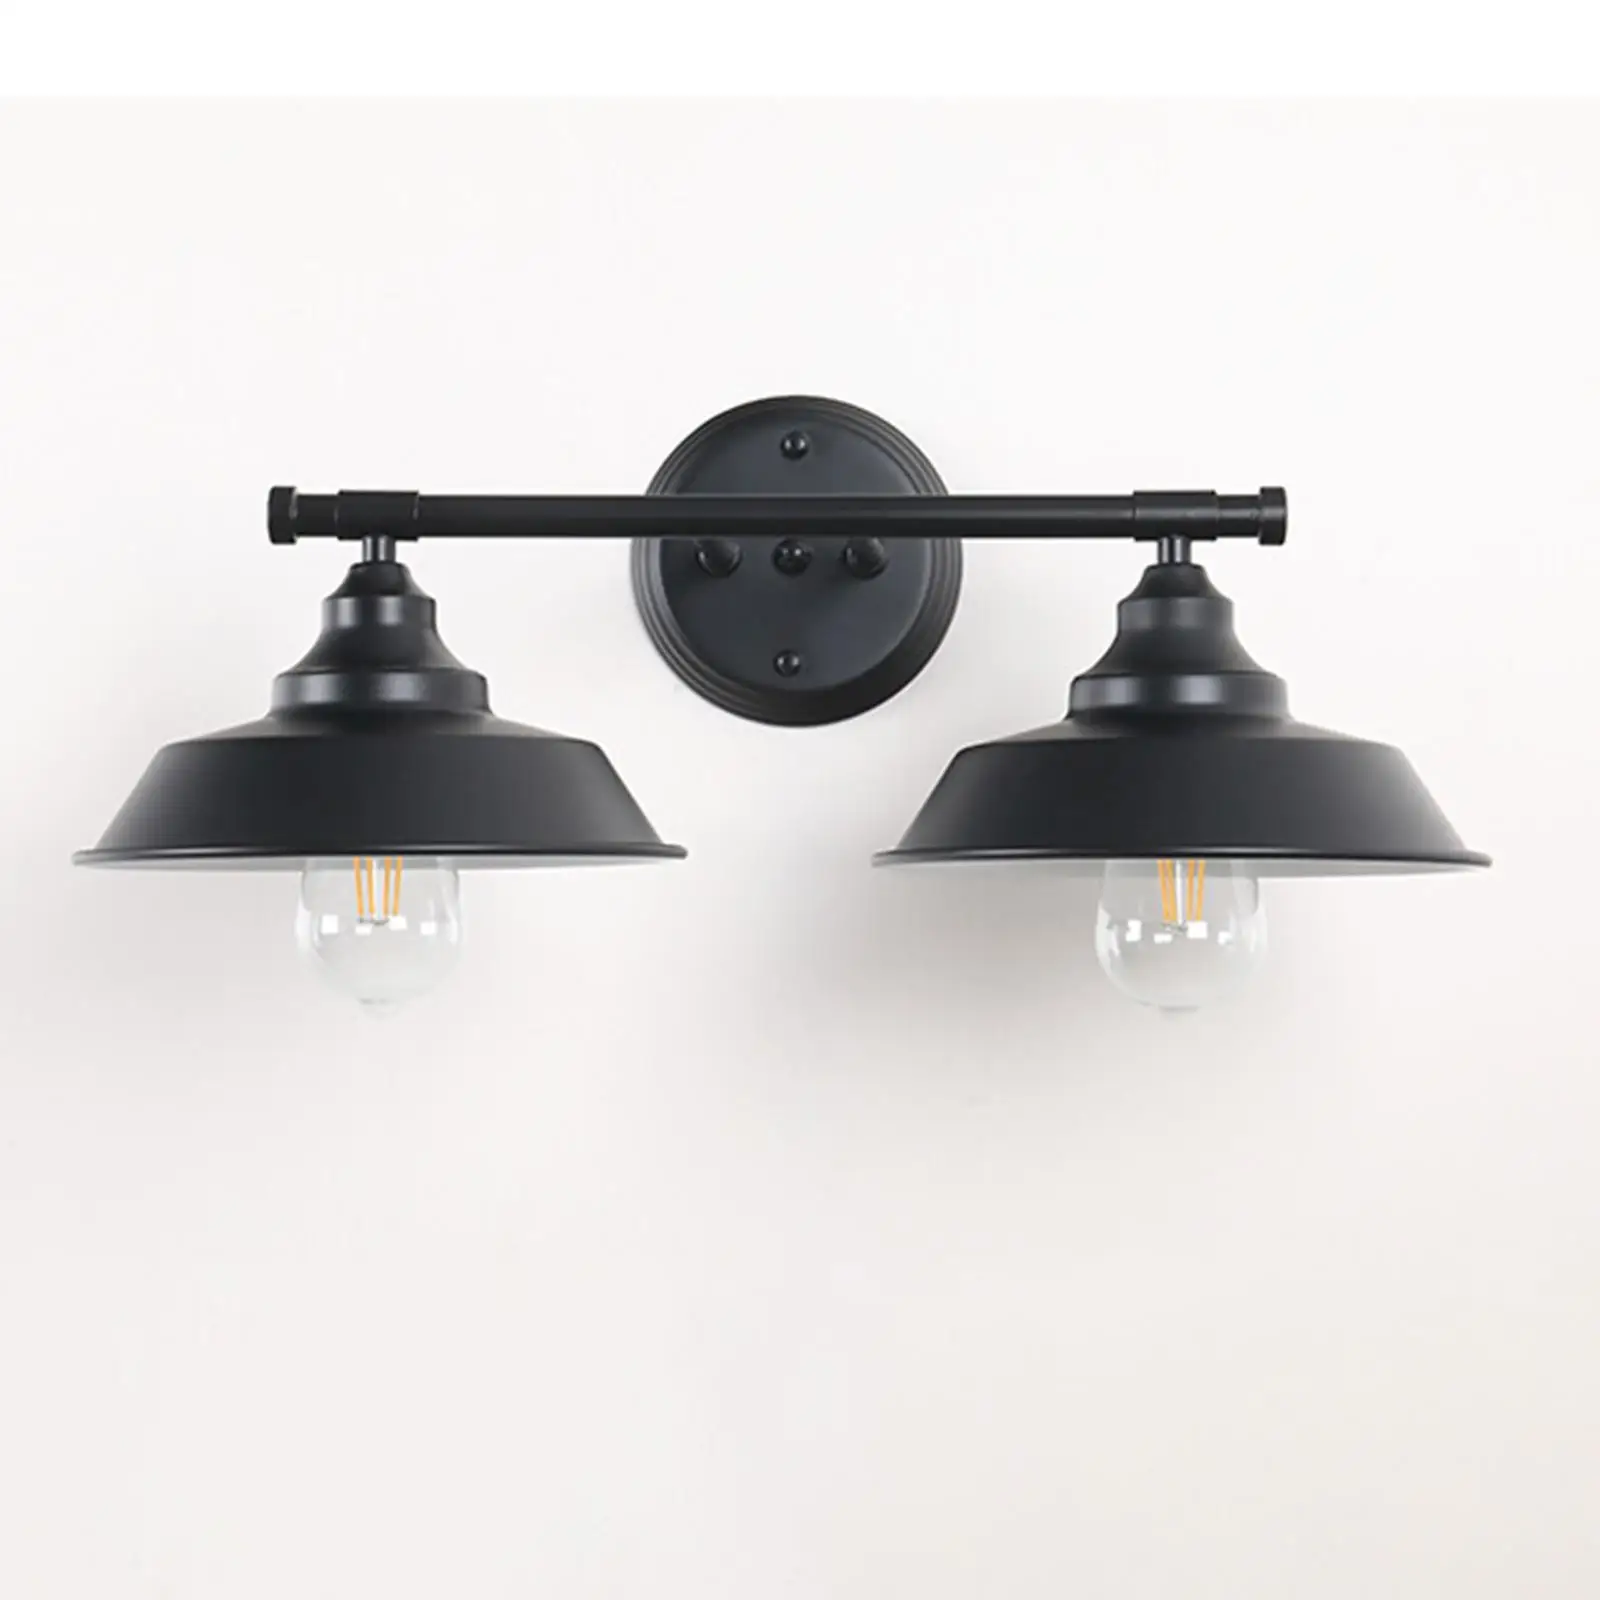 Industrial Wall Sconce Wall Lamp Lighting Fixtures Garage Dining Room